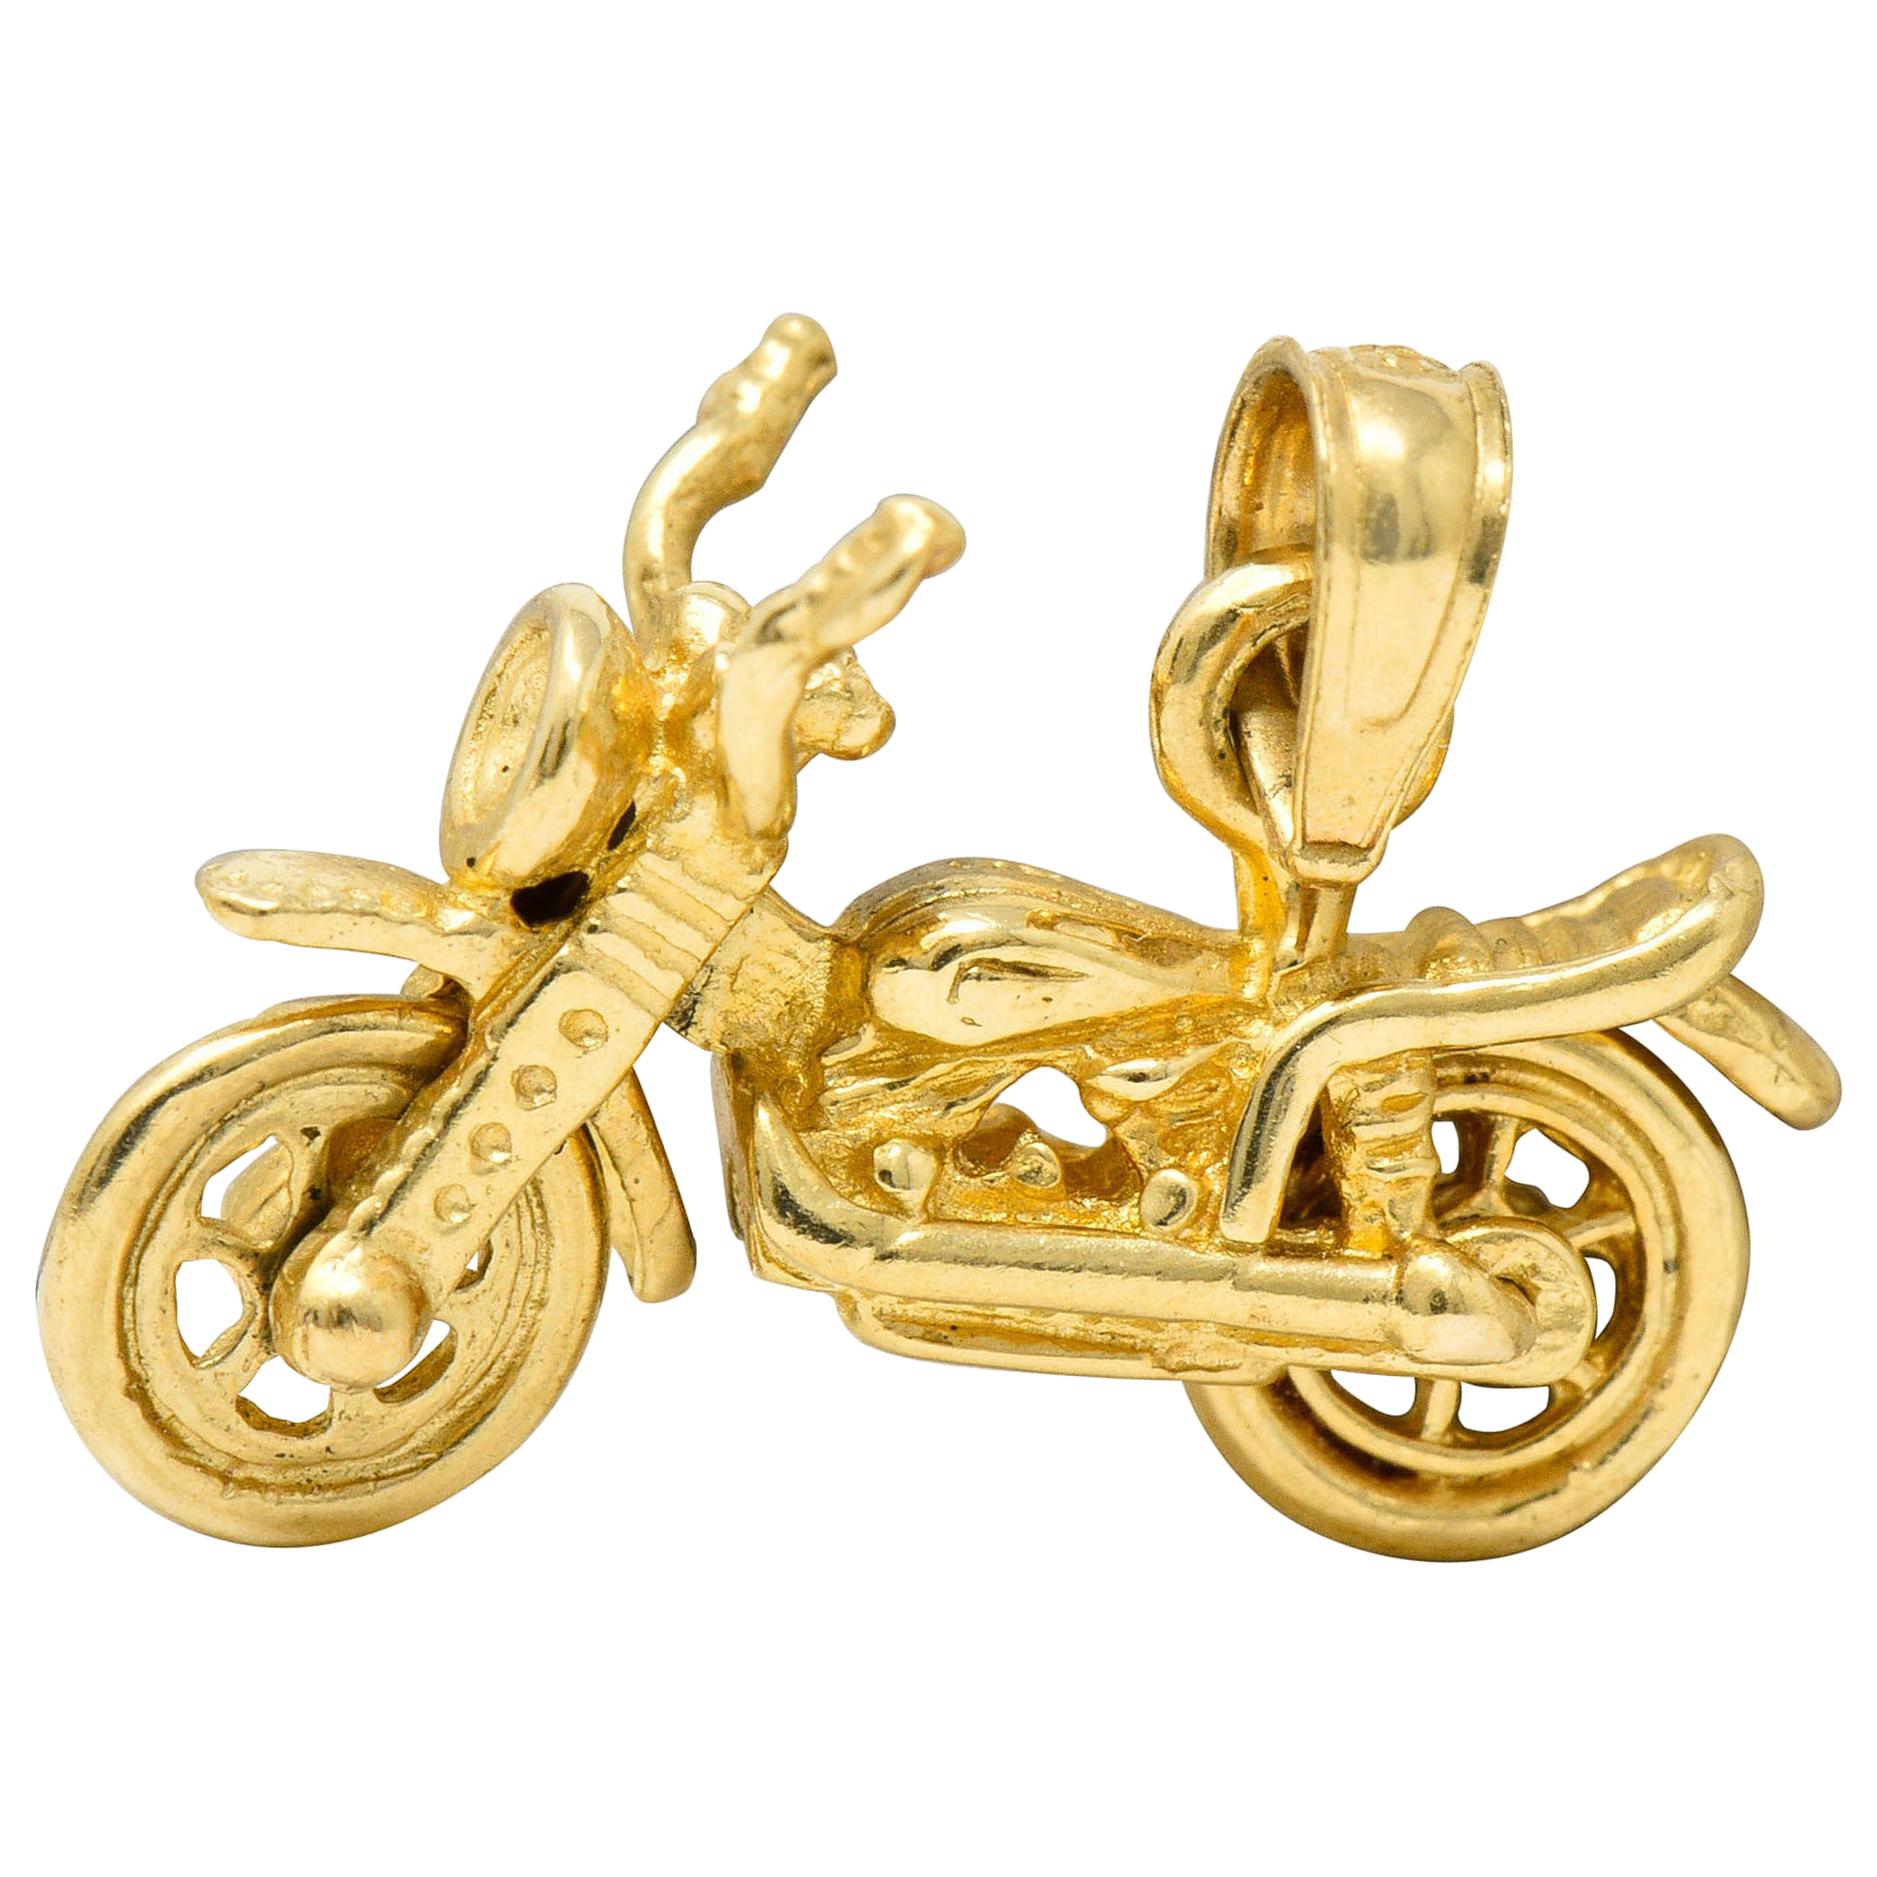 Retro 14 Karat Gold Articulated Motorcycle Charm